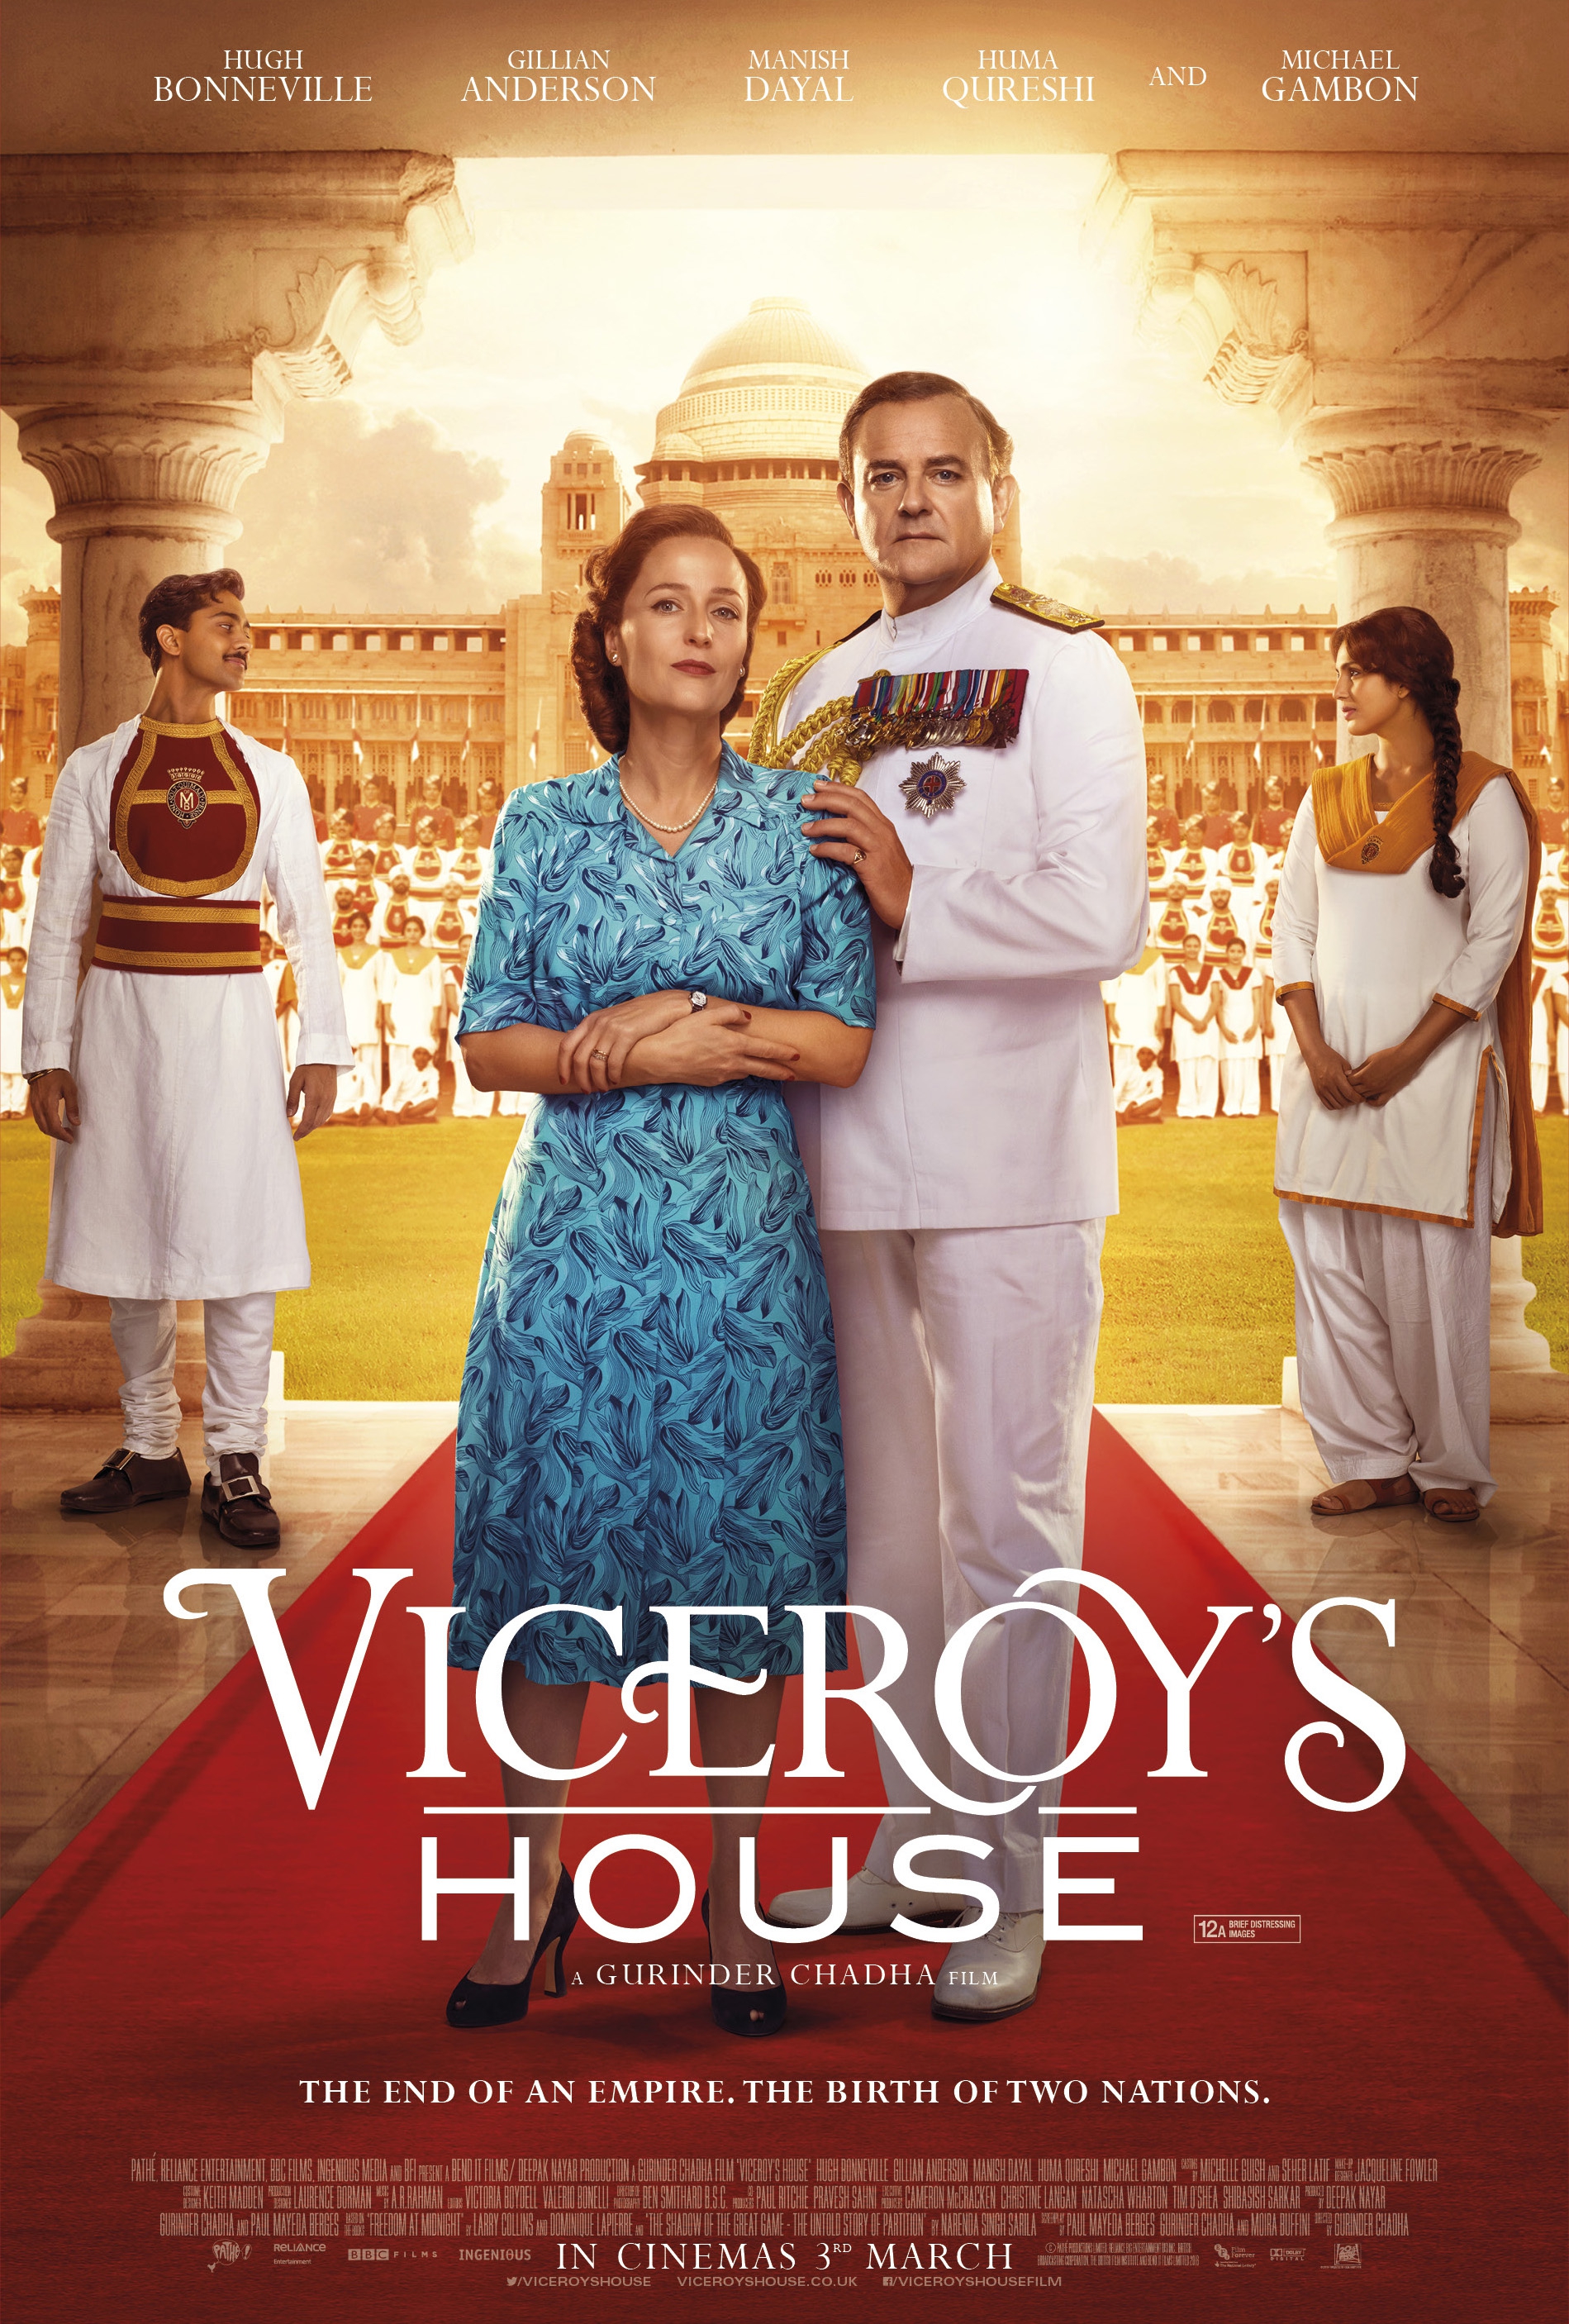  Viceroy's House (2017) Poster 